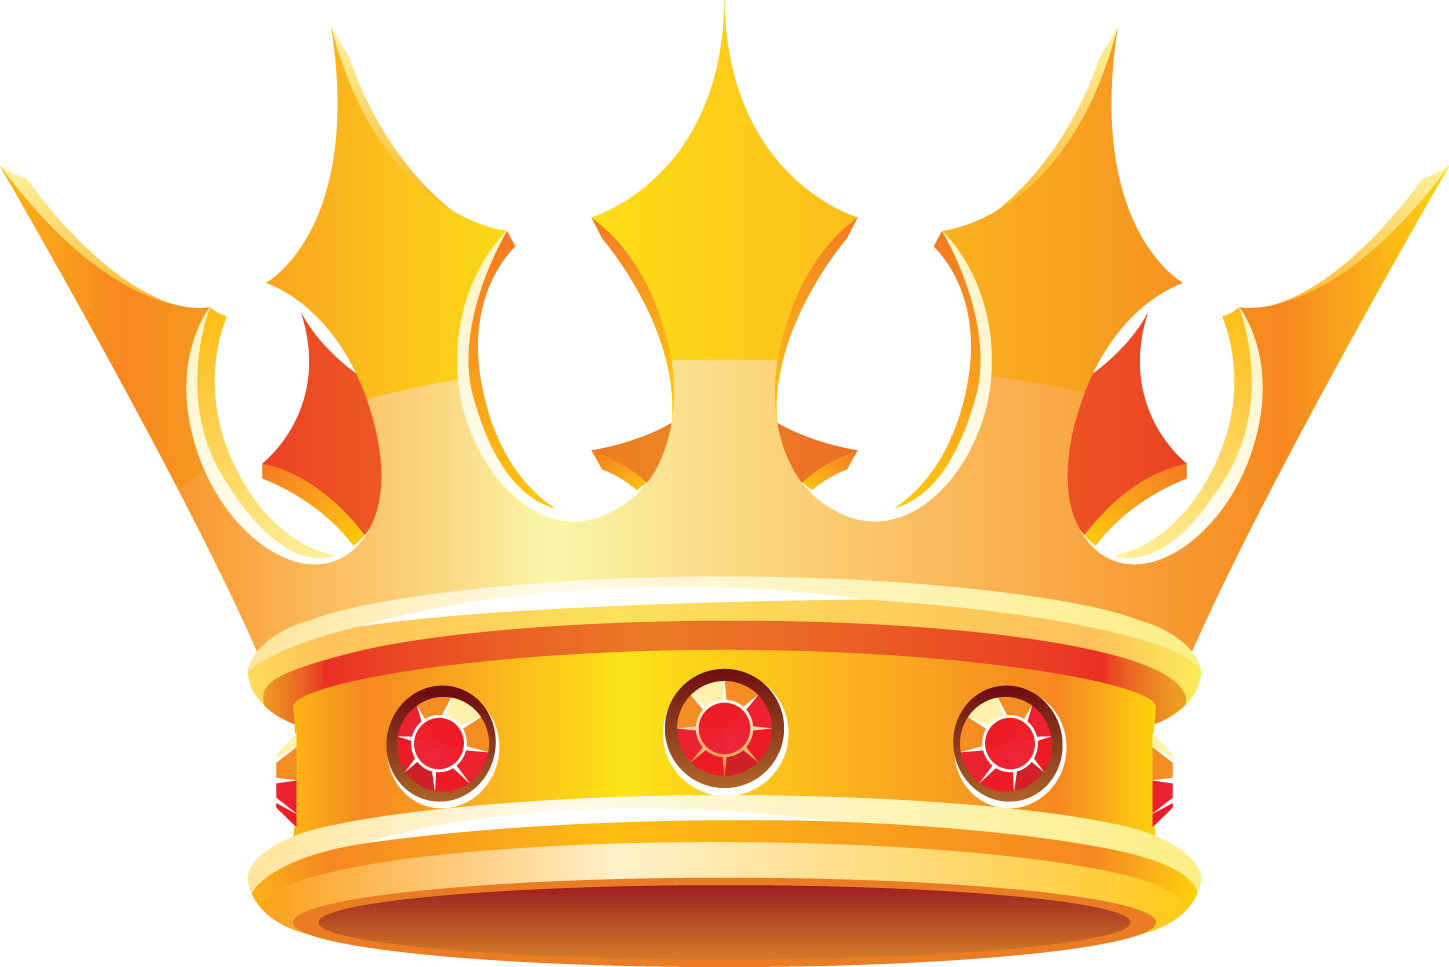 Clipart crowns for kings - ClipartFox